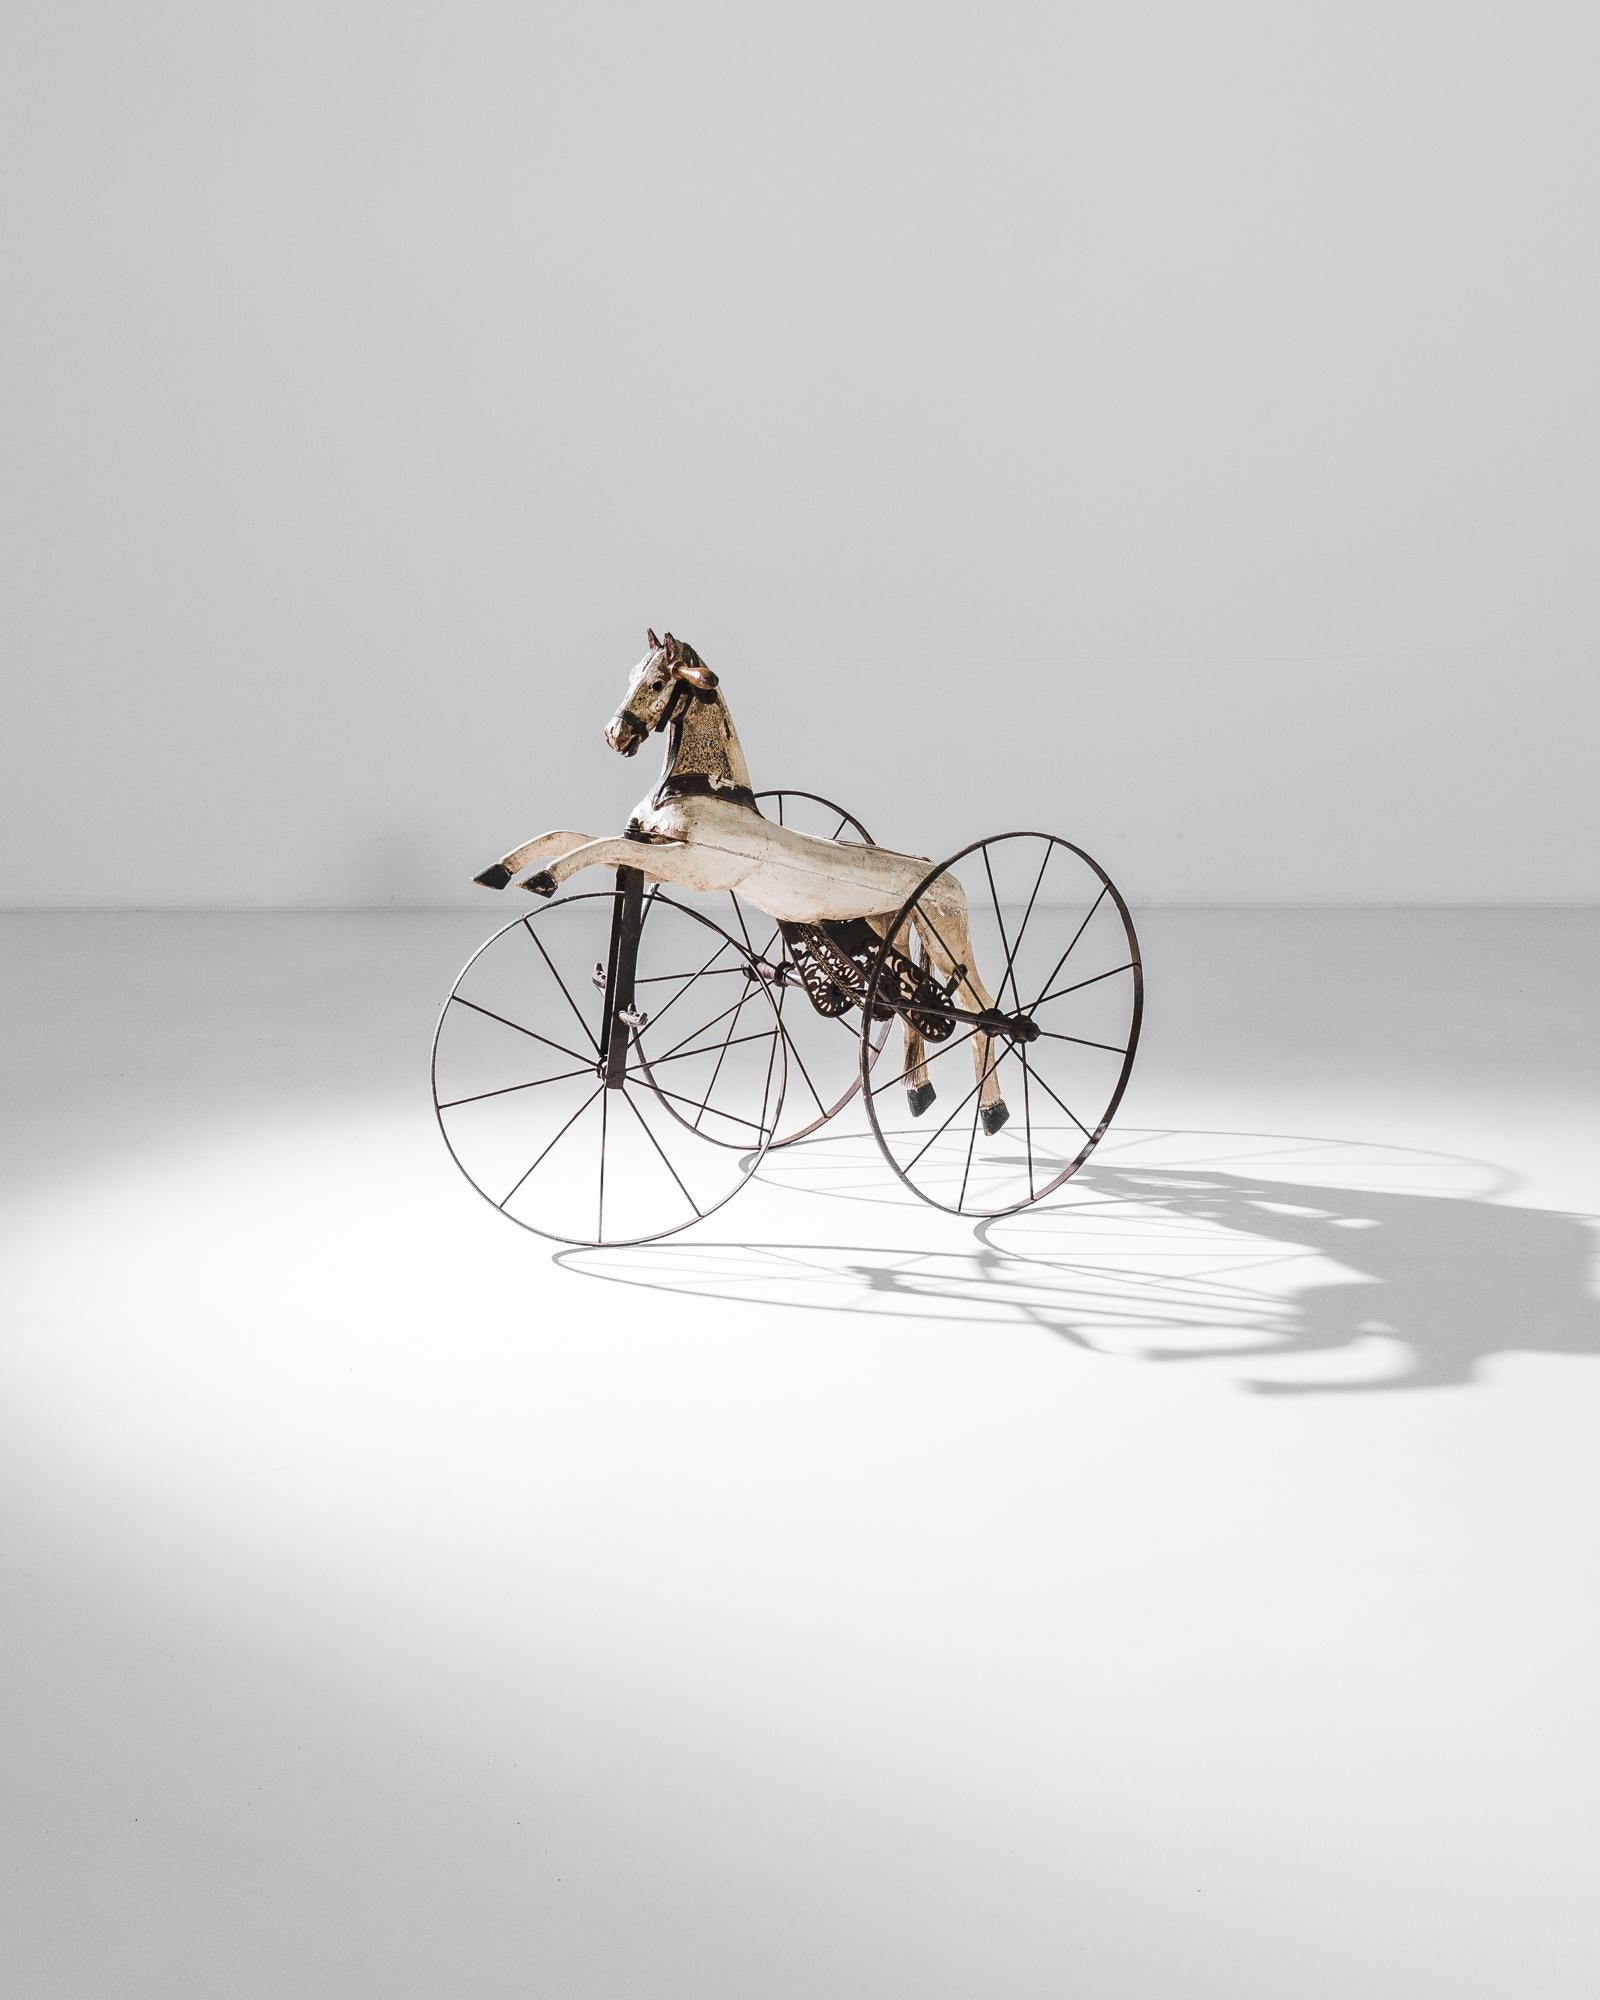 A horse tricycle from France, produced circa 1880. An antique children’s toy in the form of a leaping white horse with black bridle on three iron wheels. A charmingly simple mechanism built to ignite the imagination, to call on images of cowboys